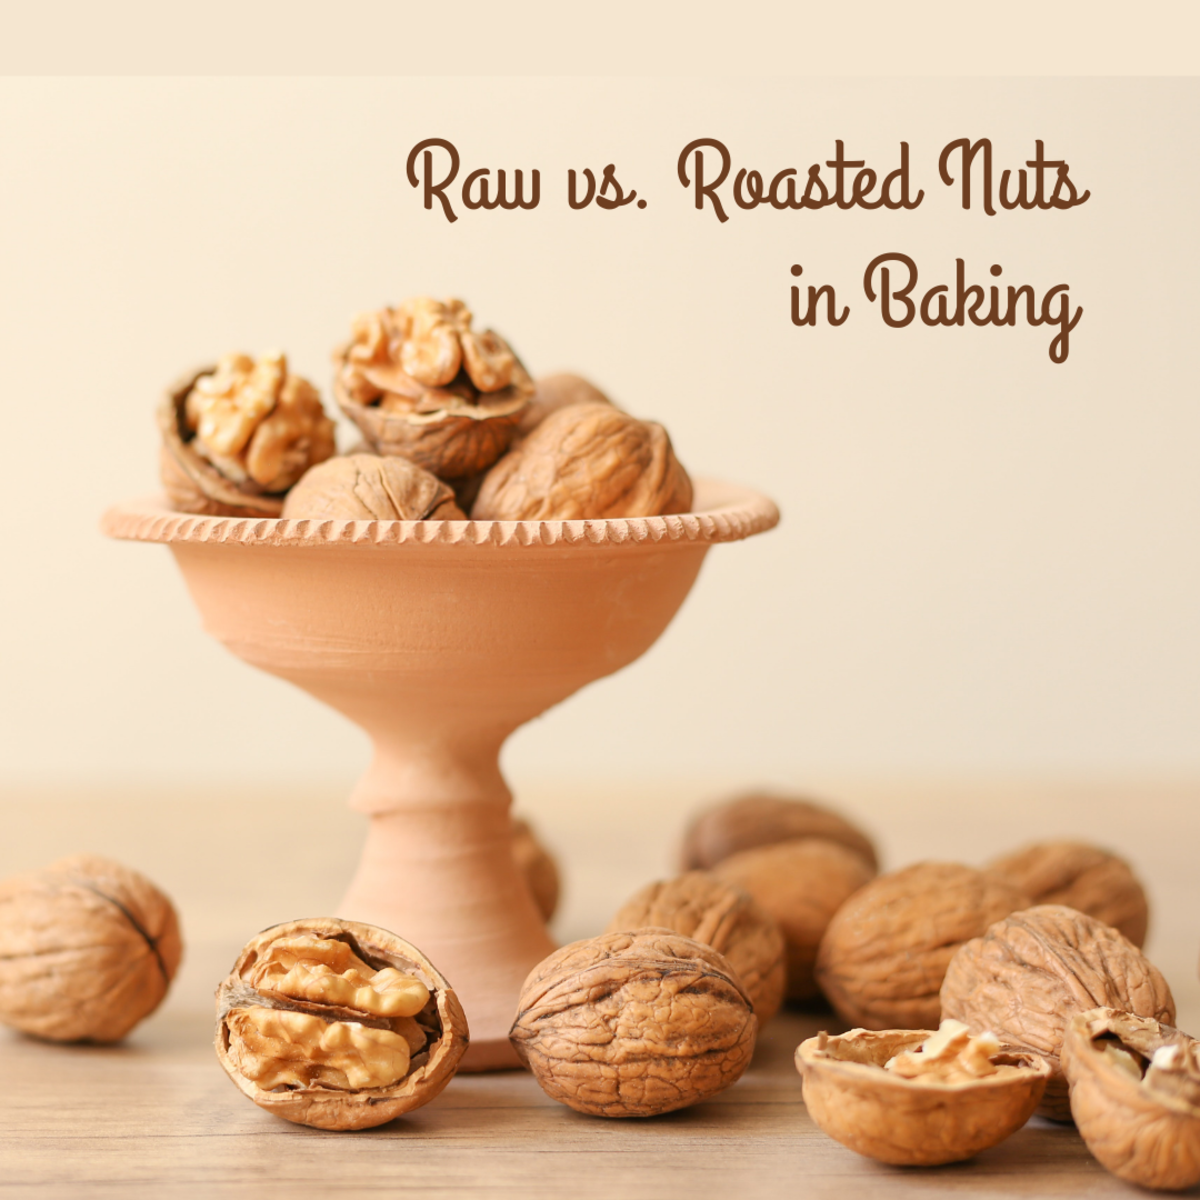 For baking, raw nuts are a better choice for two important reasons.